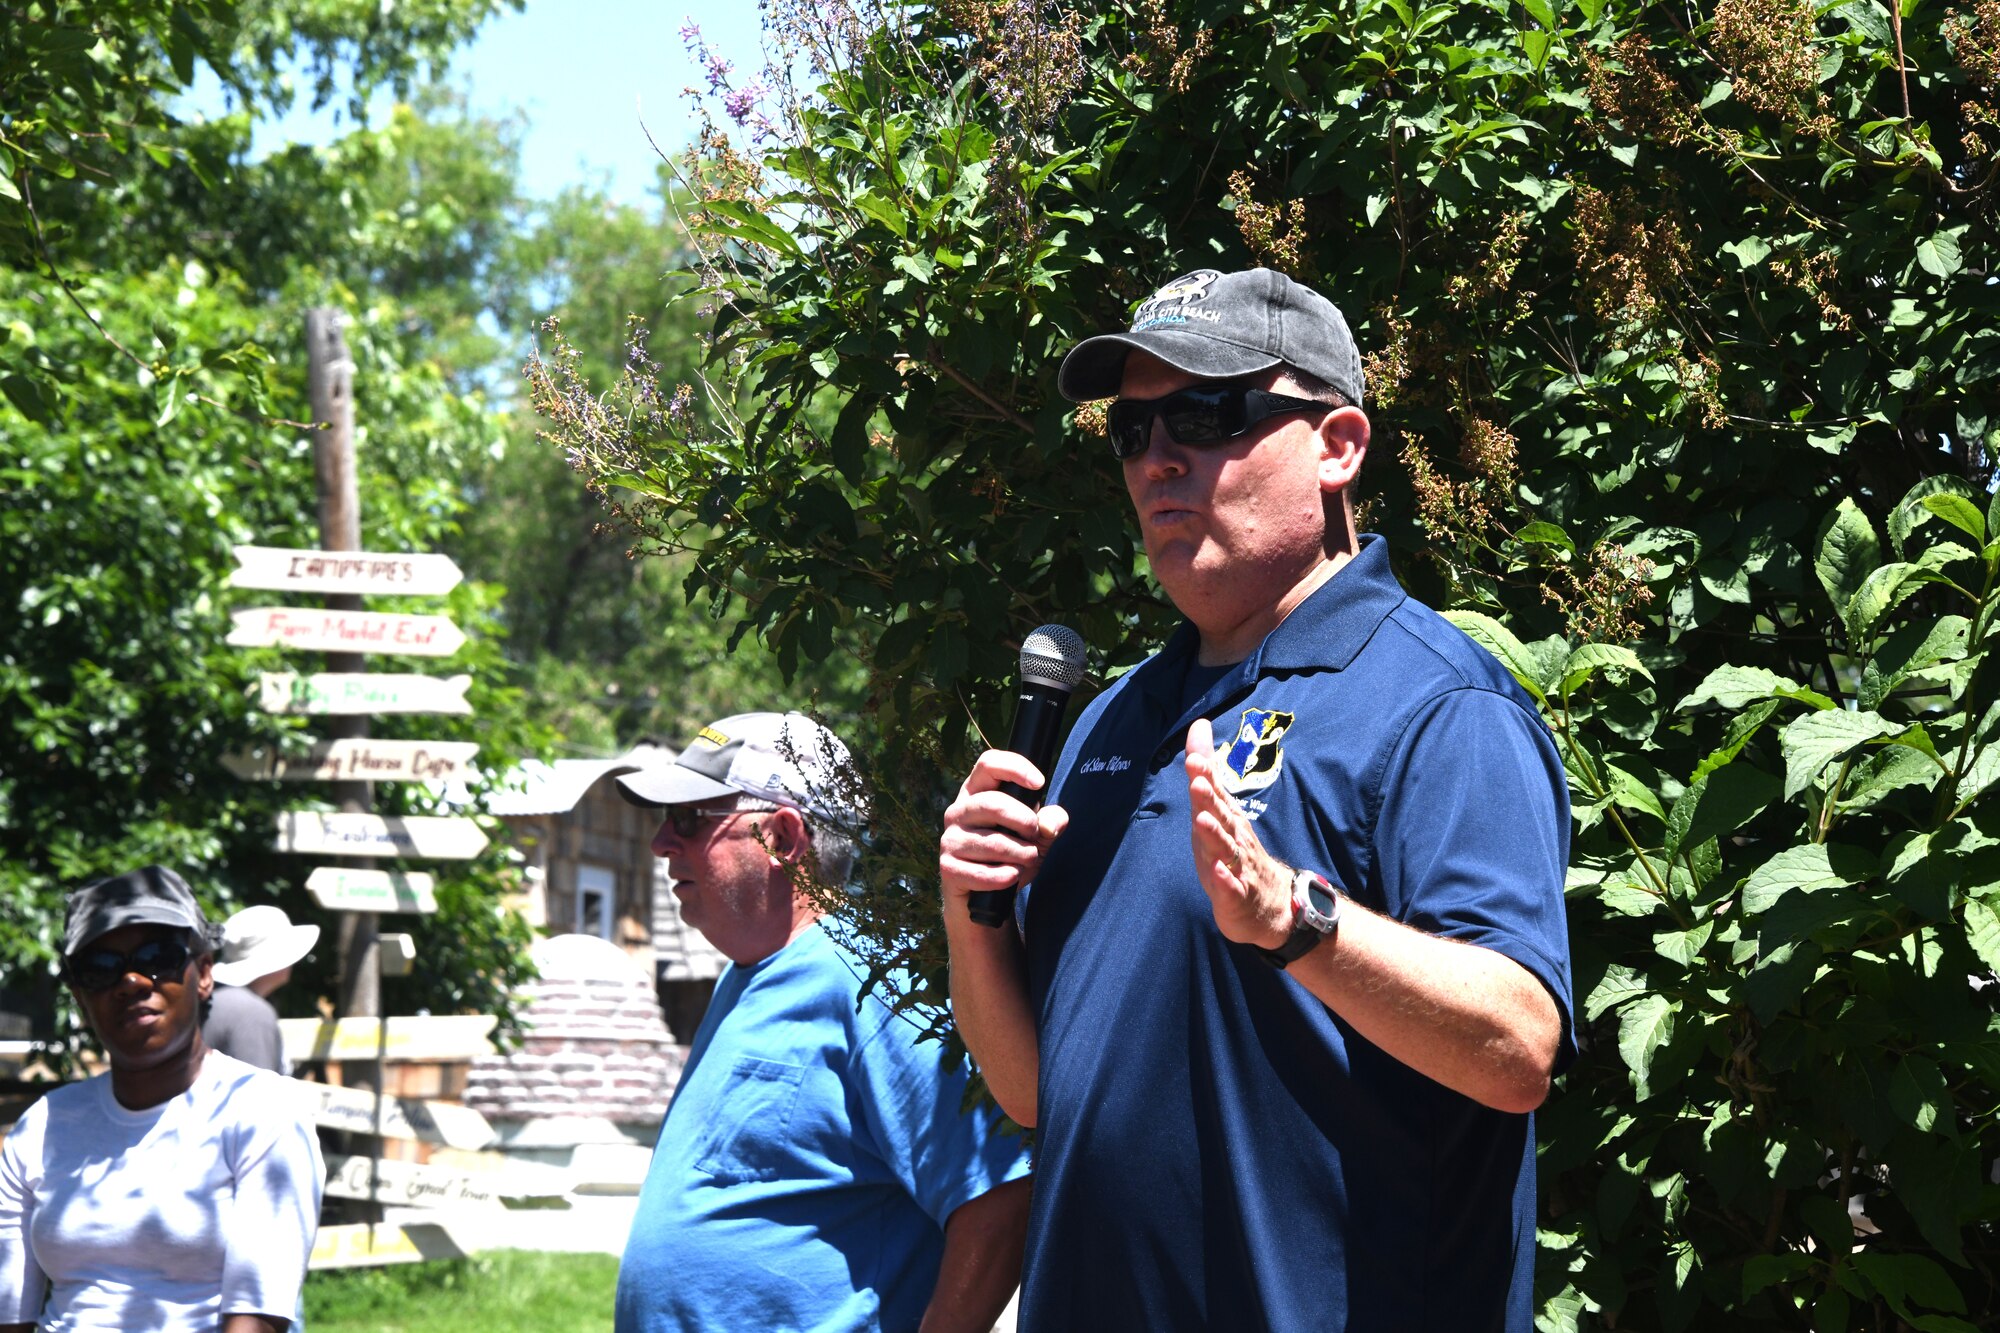 Col. Steven Vilpors, 557th Weather Wing vice commander, closed out the 2021 557th WW Annual Picnic by giving thanks to the Co-Commanders for their support and the planning committee for all the hard work to put the event together on June 4, 2021 at the Bellevue Berry Farm in Bellevue, Nebraska.